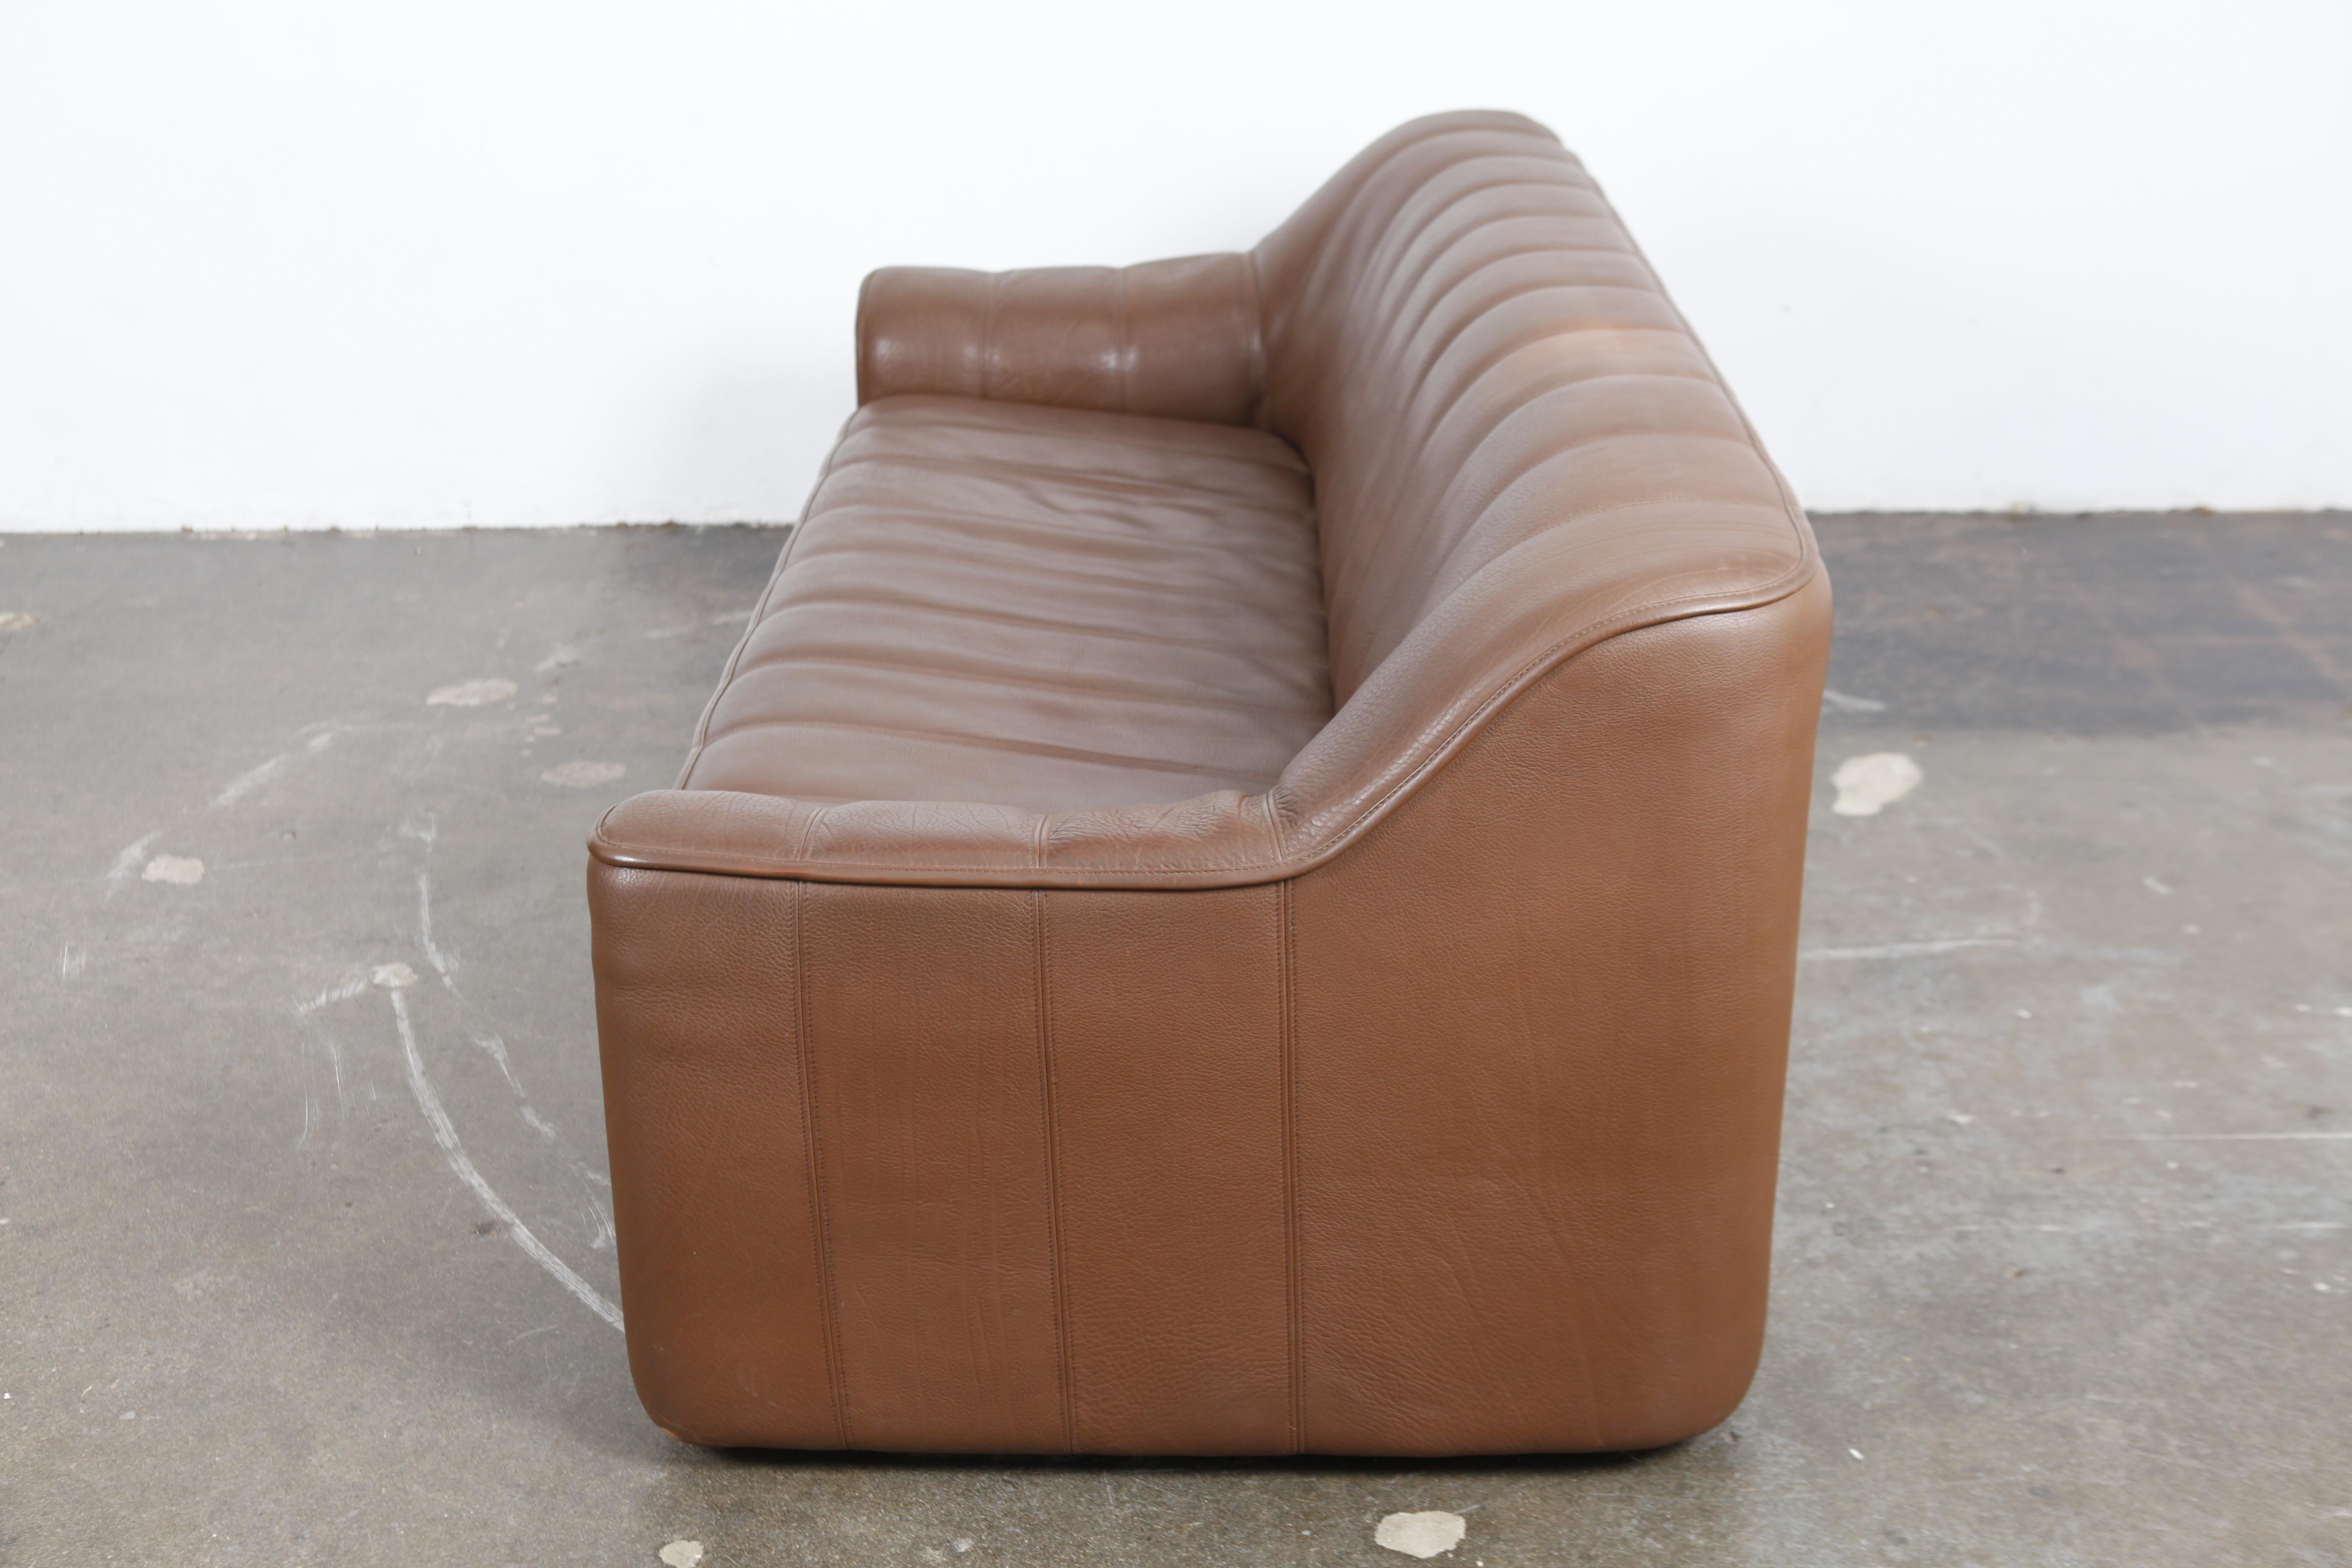 Late 20th Century 1970s De Sede Leather 3-Seat Sofa 'Model DS 44' from Switzerland For Sale